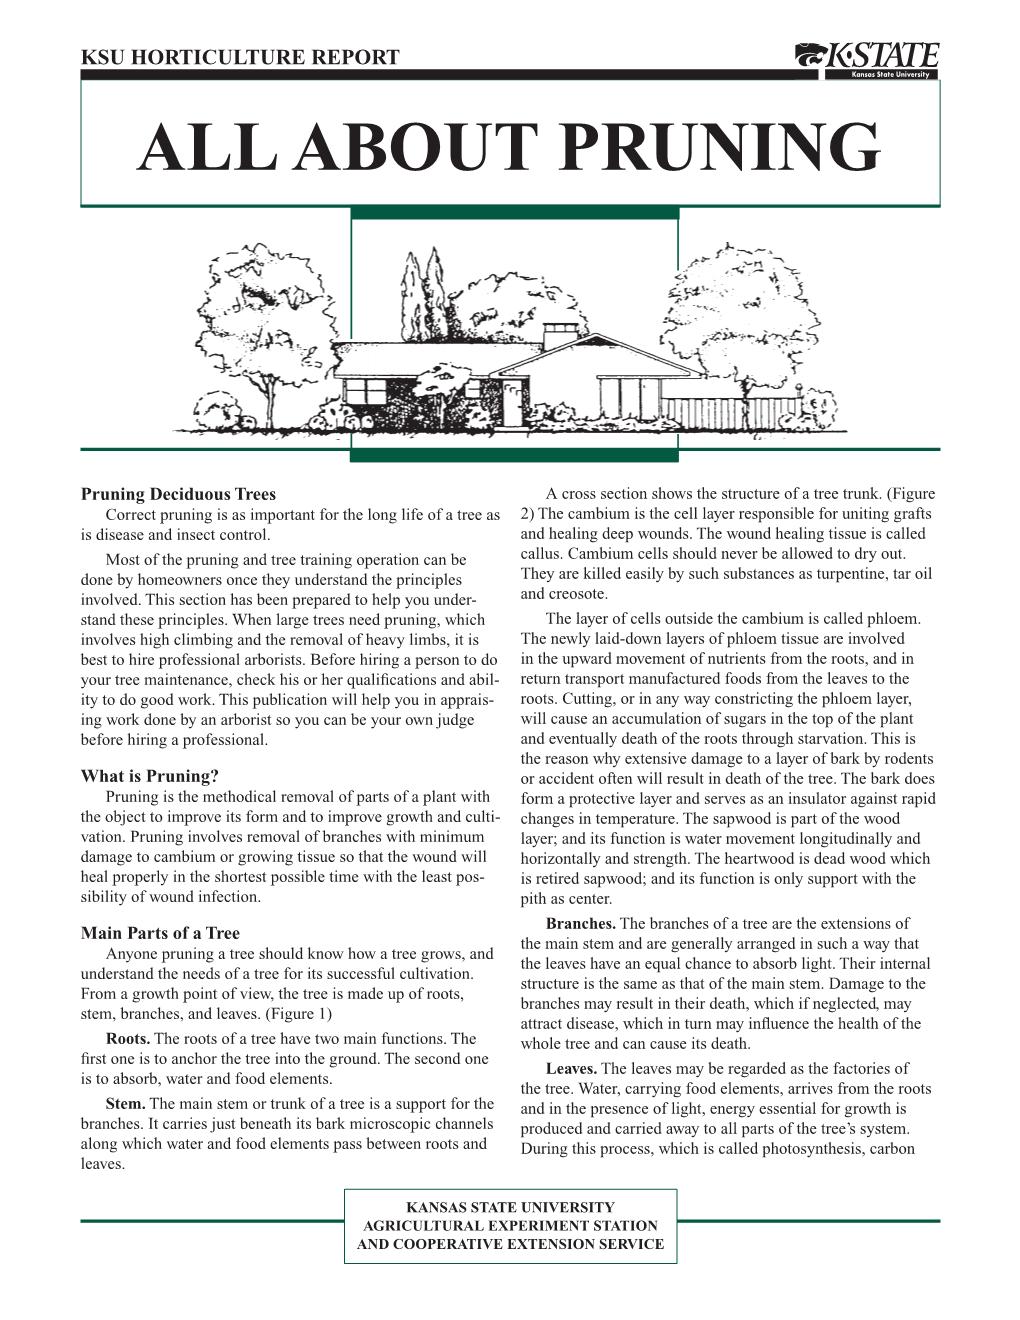 About Pruning